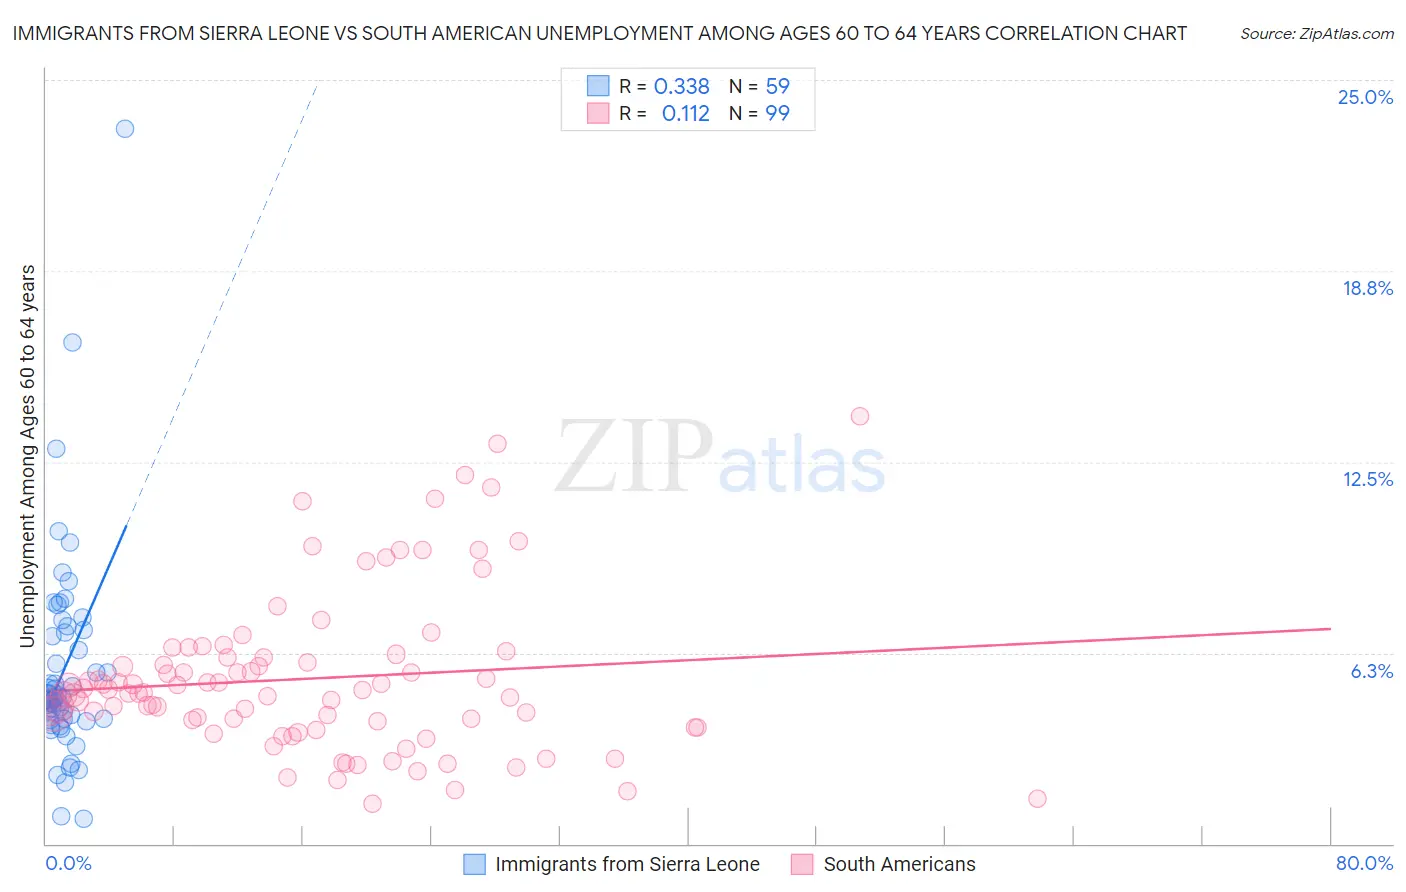 Immigrants from Sierra Leone vs South American Unemployment Among Ages 60 to 64 years